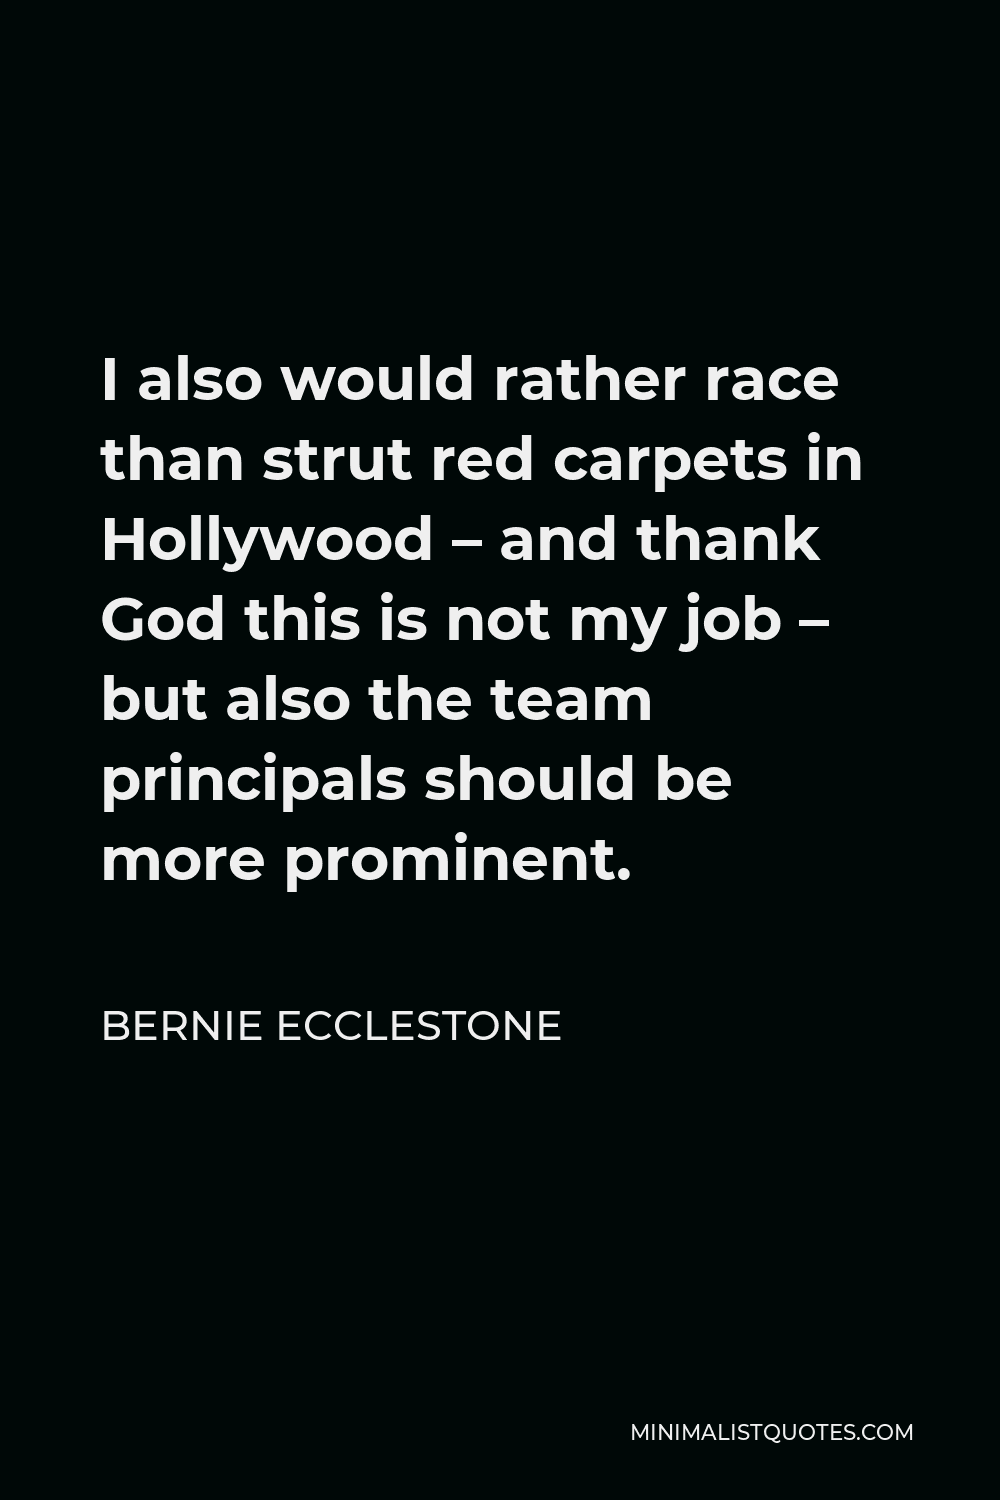 Bernie Ecclestone Quote - I also would rather race than strut red carpets in Hollywood – and thank God this is not my job – but also the team principals should be more prominent.